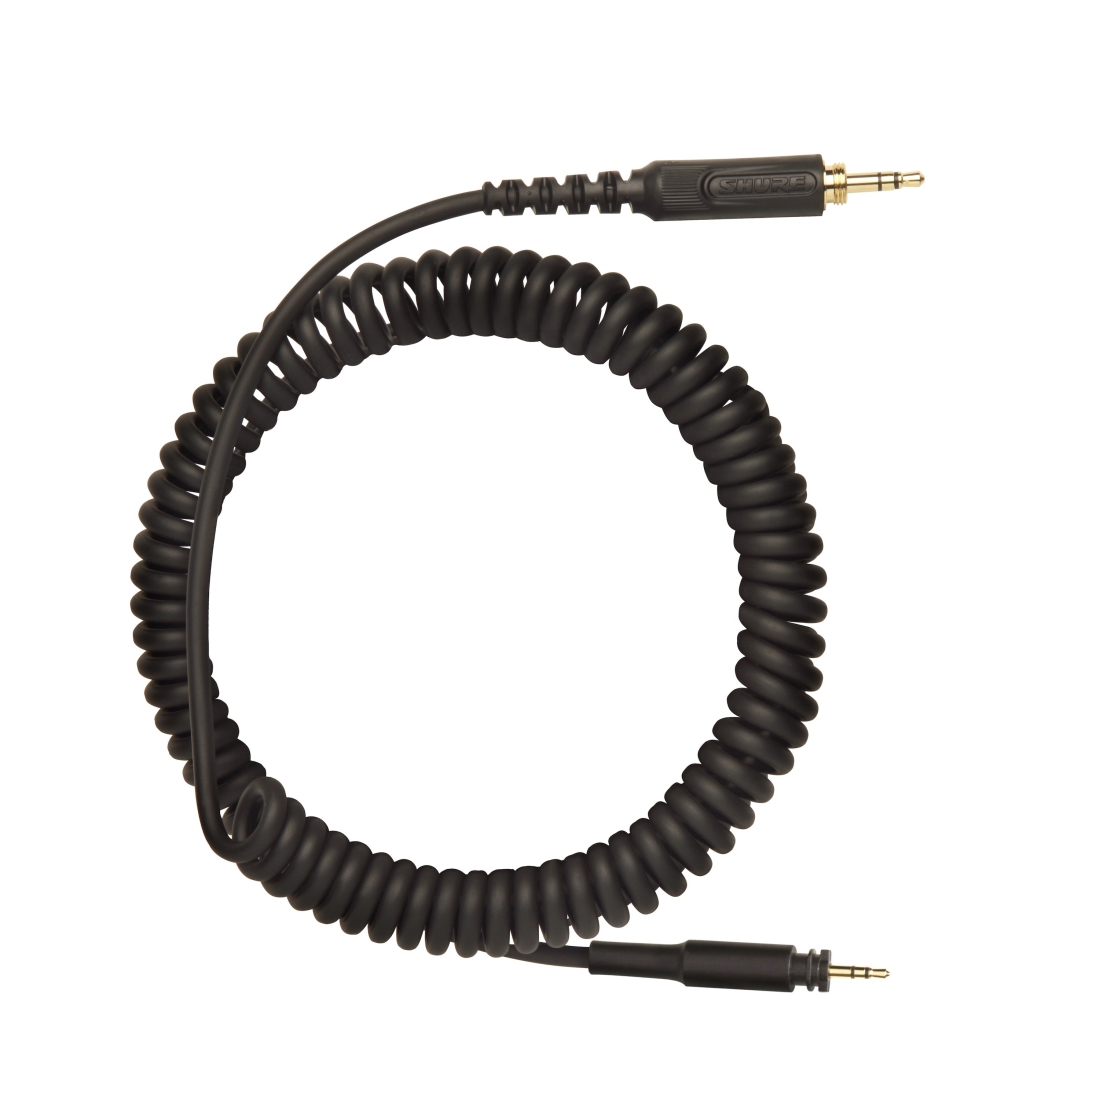 Coiled Cable for Shure SRH440A and SRH840A Headphones